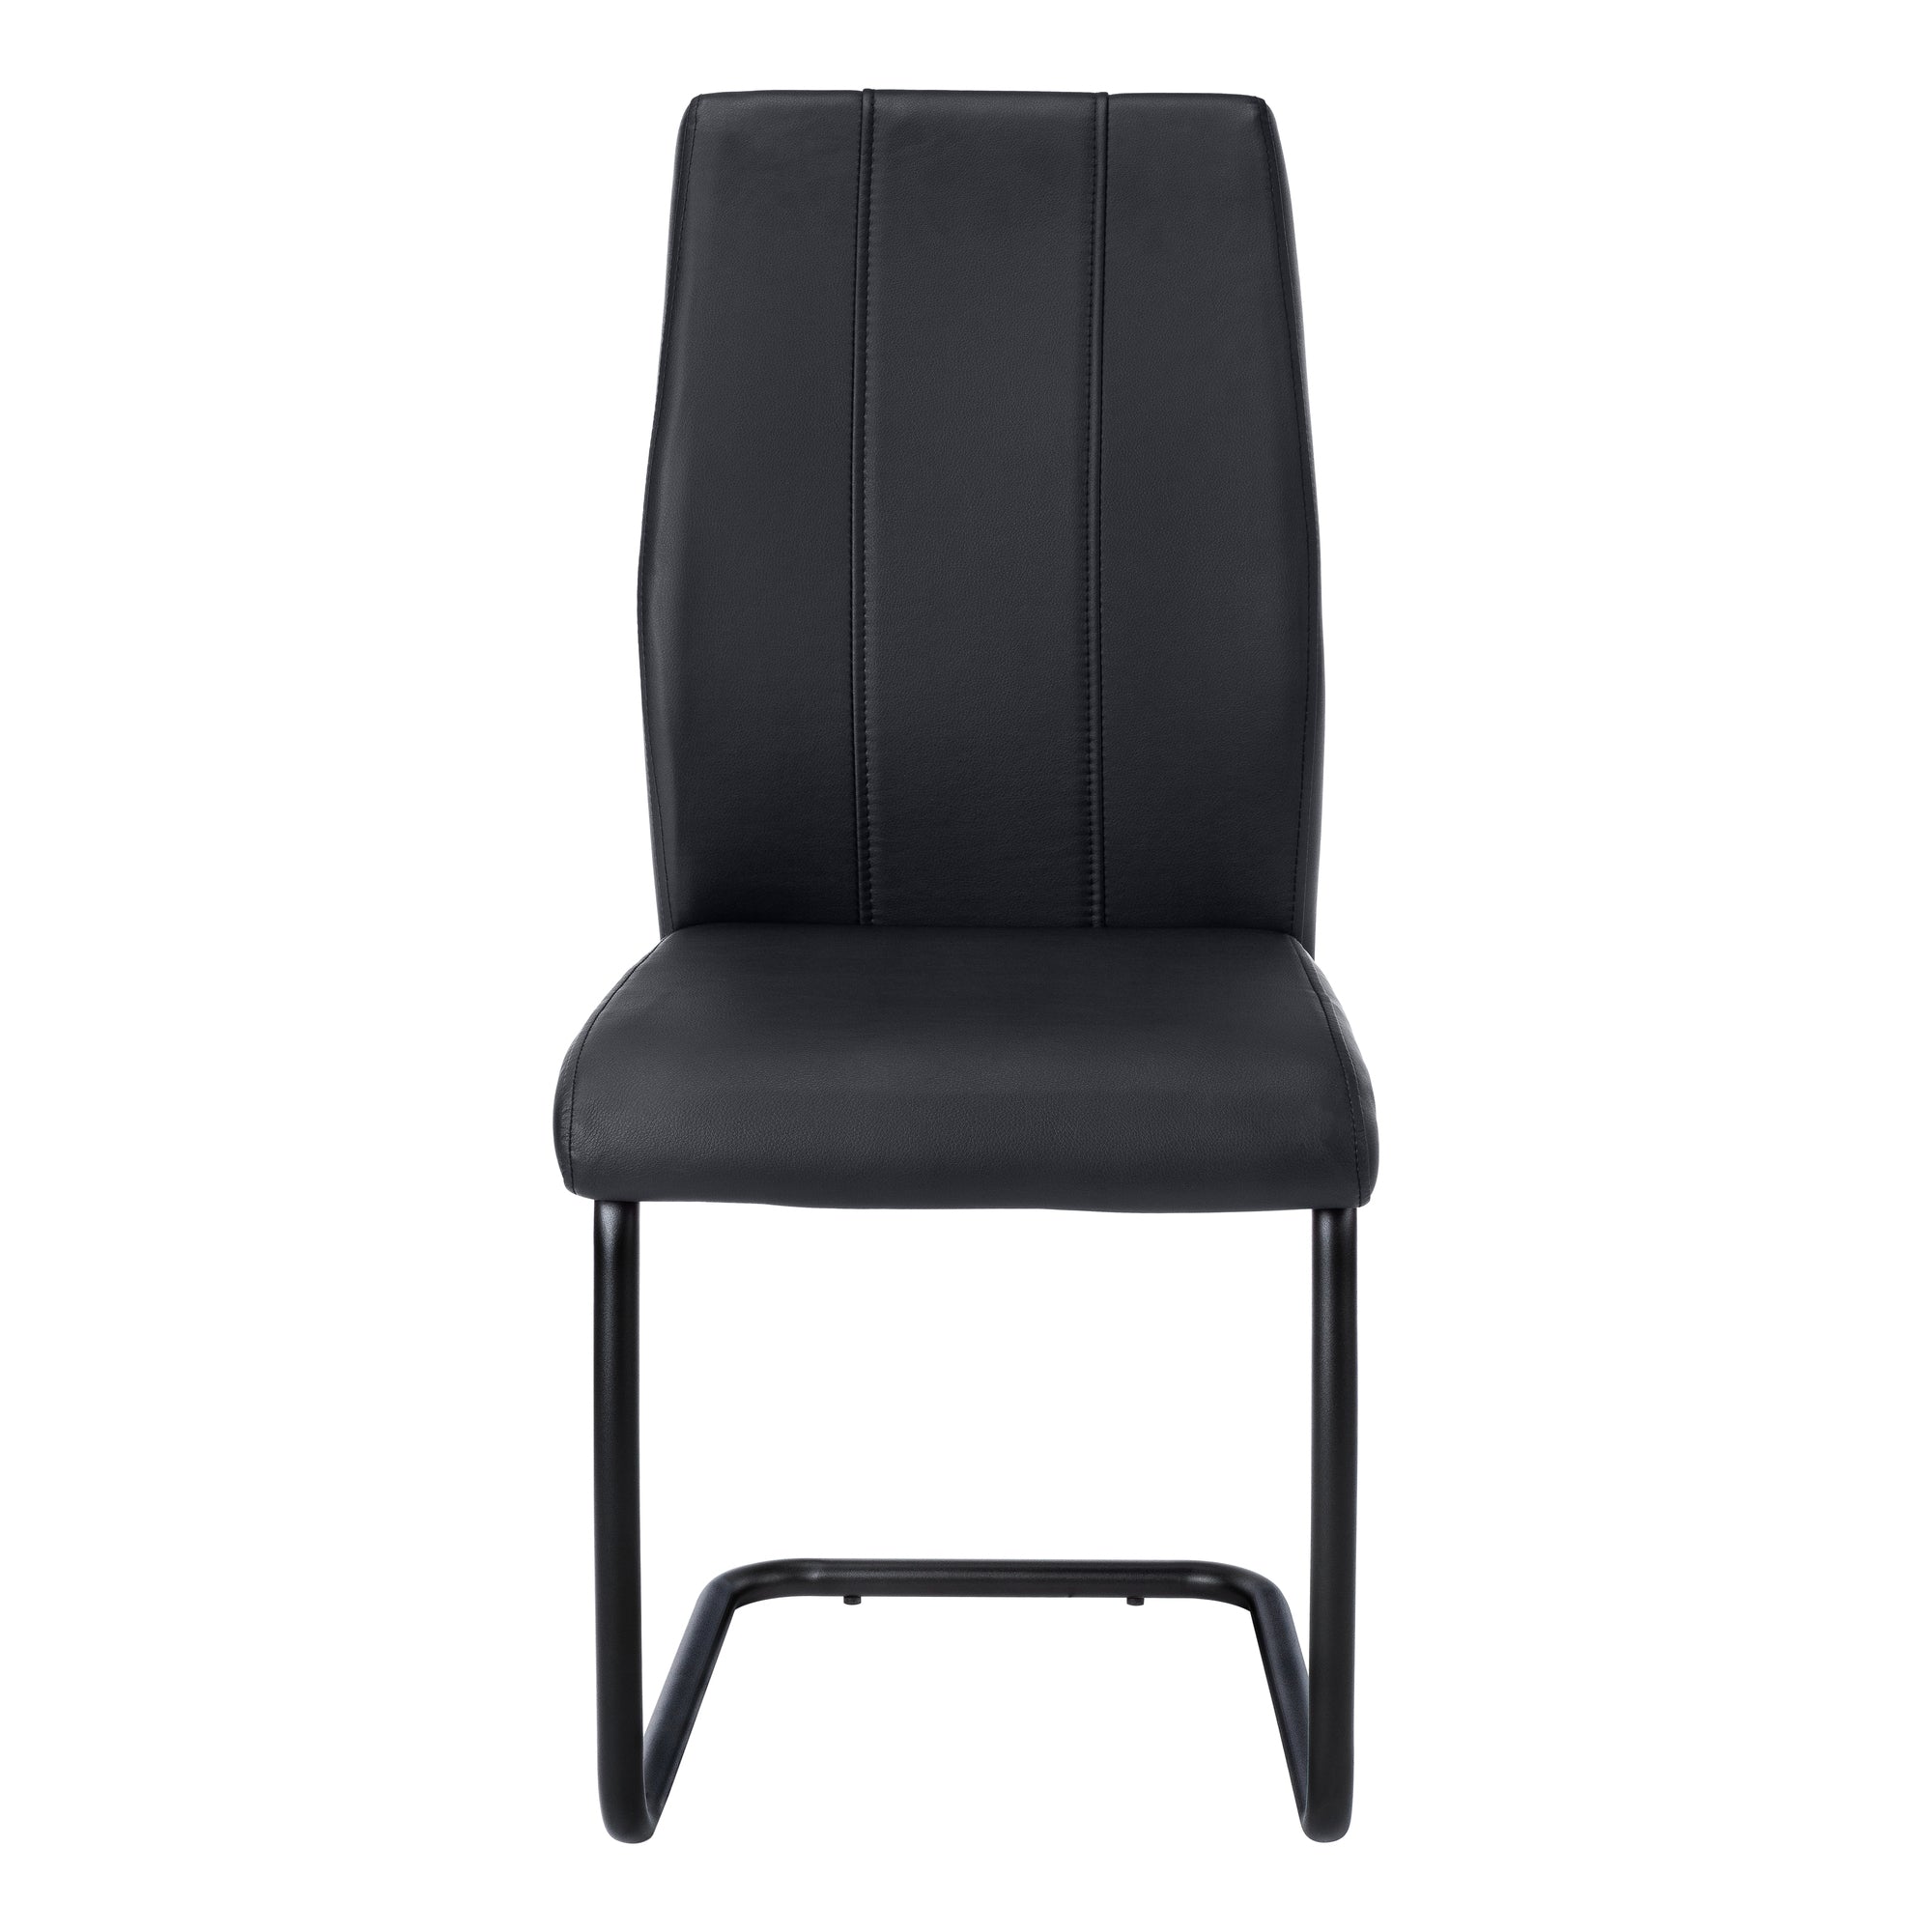 Luxury High-Back Leather-Look Dining Chair (Set of 2 - Black)